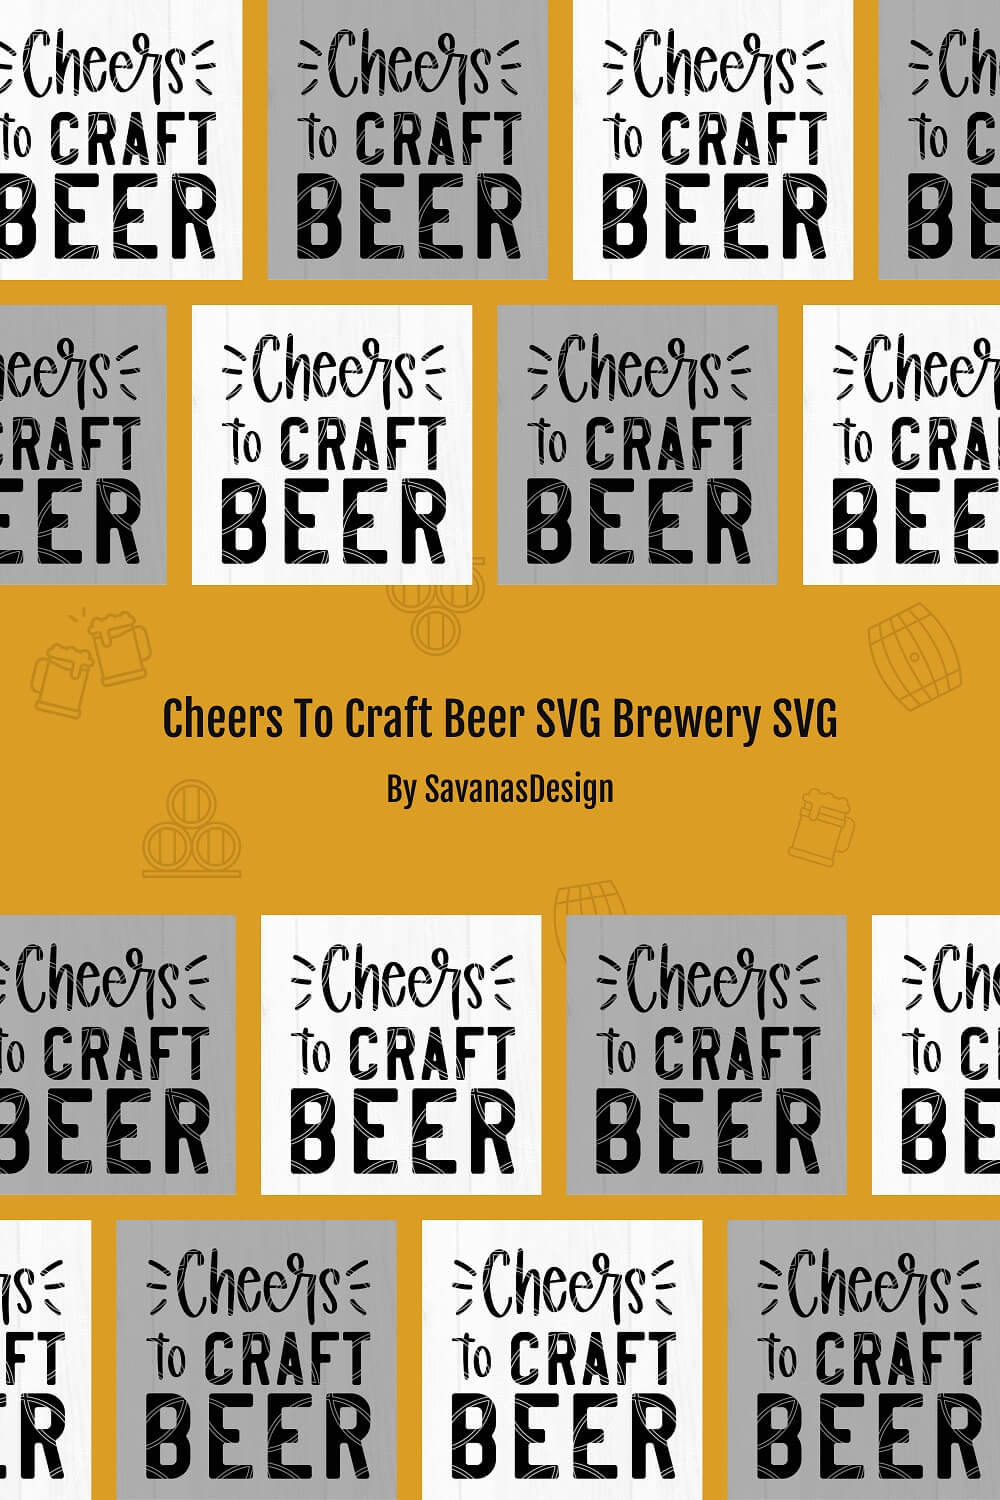 A few images with inscription "Cheers to craft beer" on the orange background.